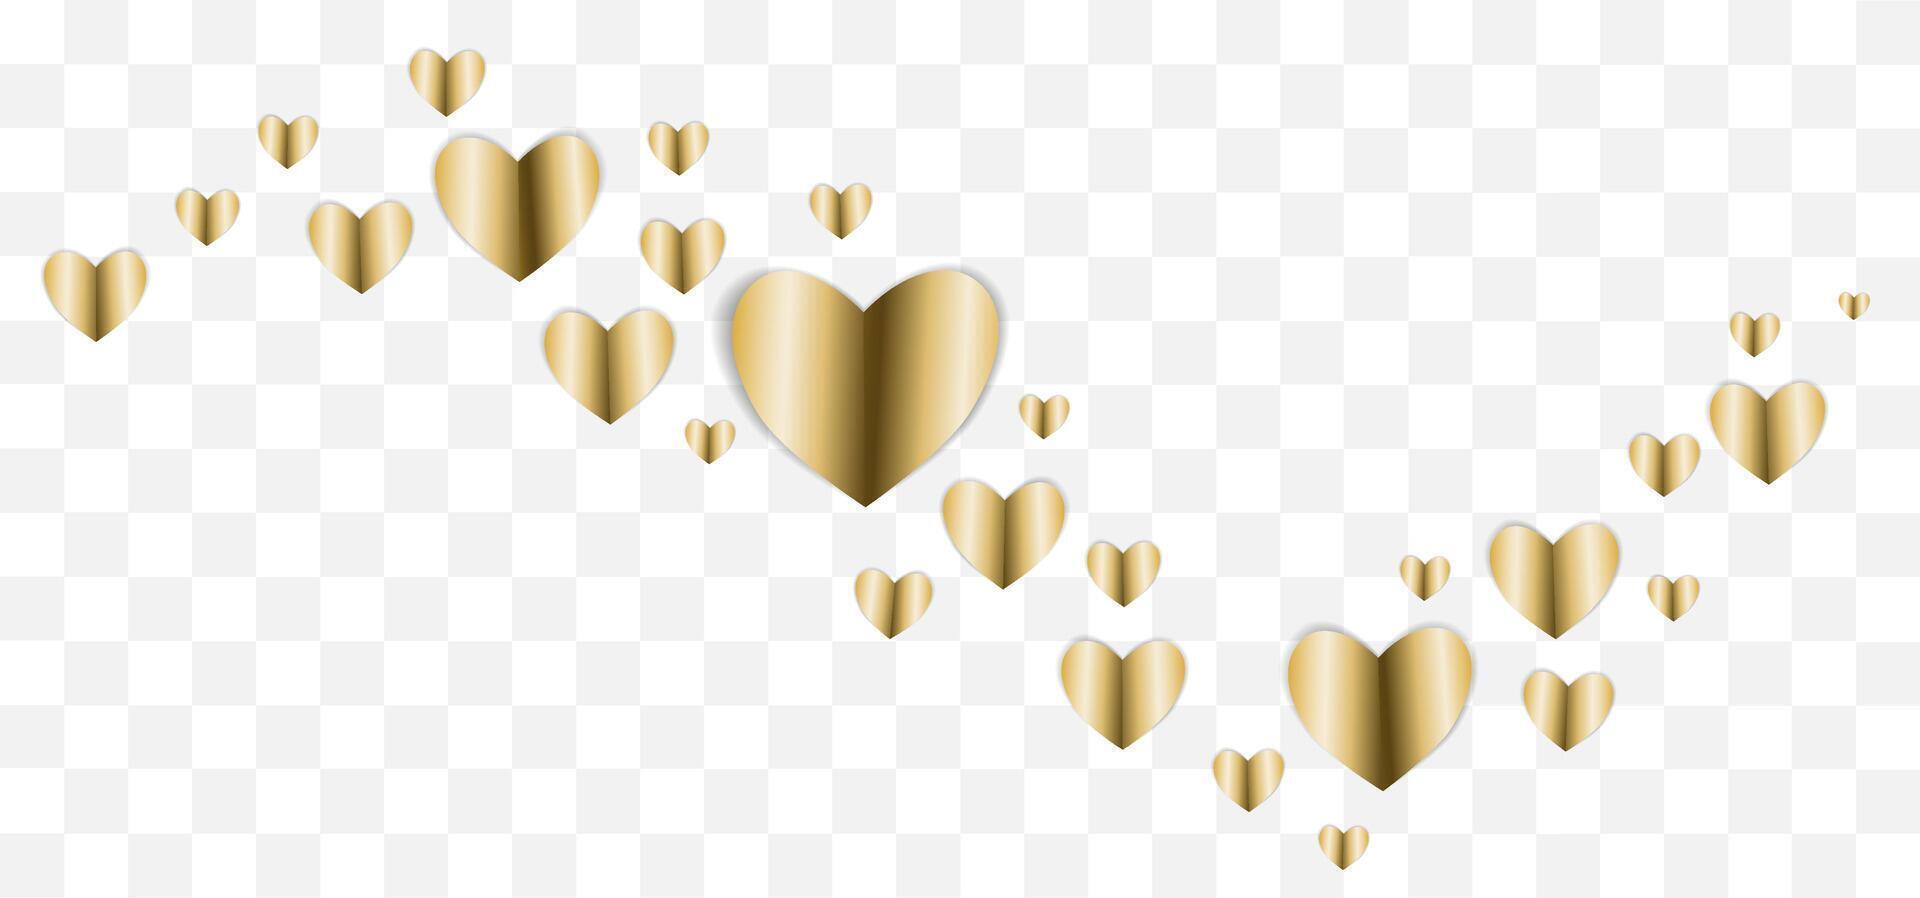 Luxury gold abstract design pattern. Vector illustration for holiday design. Many gold hearts. Header For wedding card, valentine day greetings, lovely frame